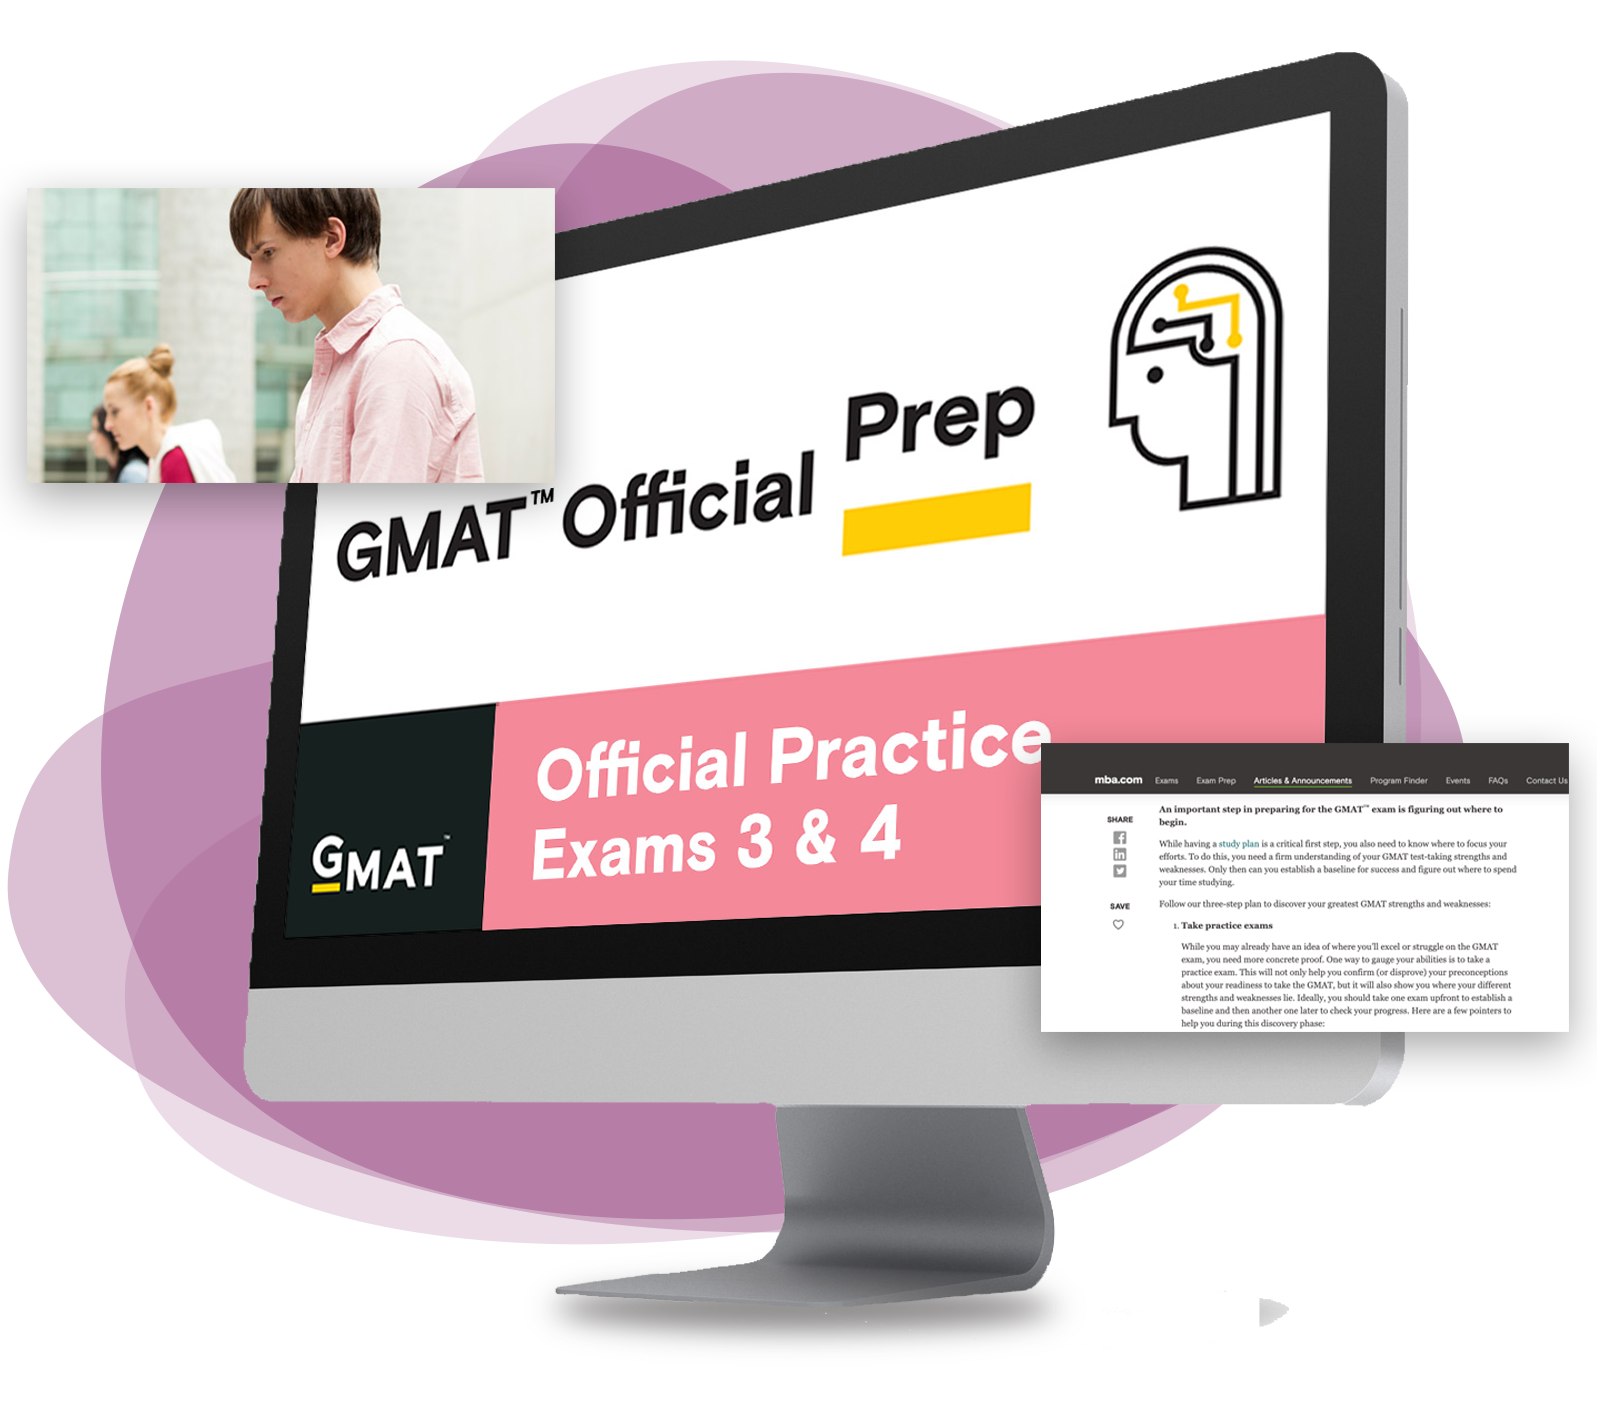 OfficialGMAT on X: You still have the opportunity to turn your